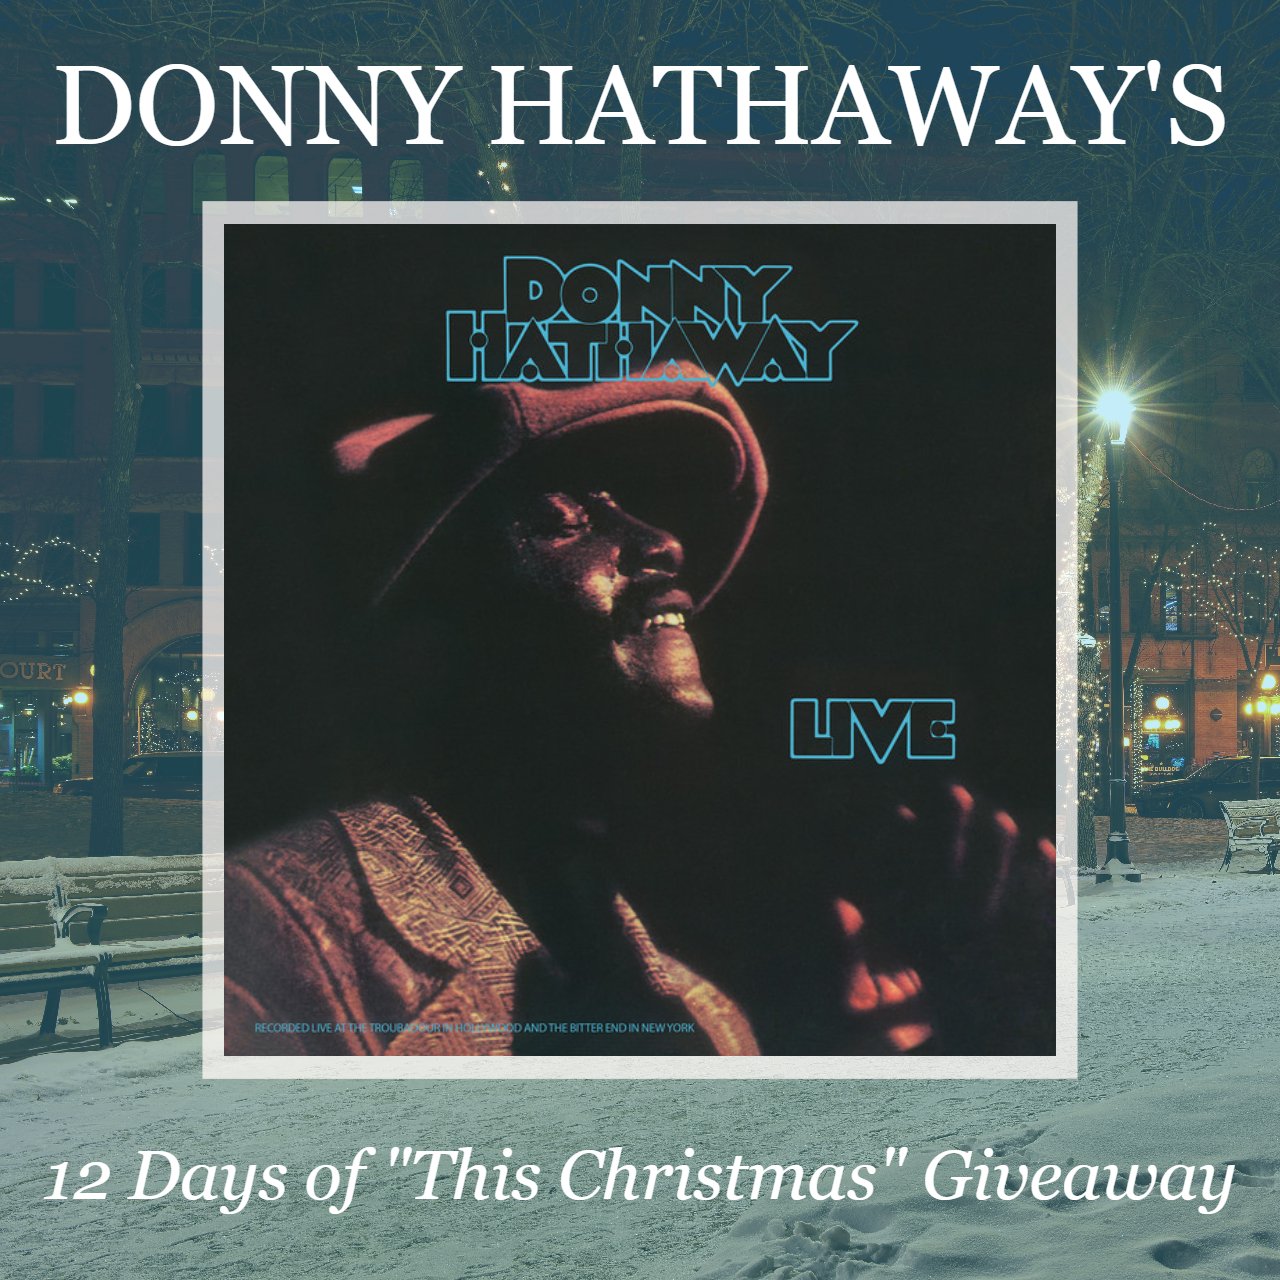 Donny Hathaway on X: 